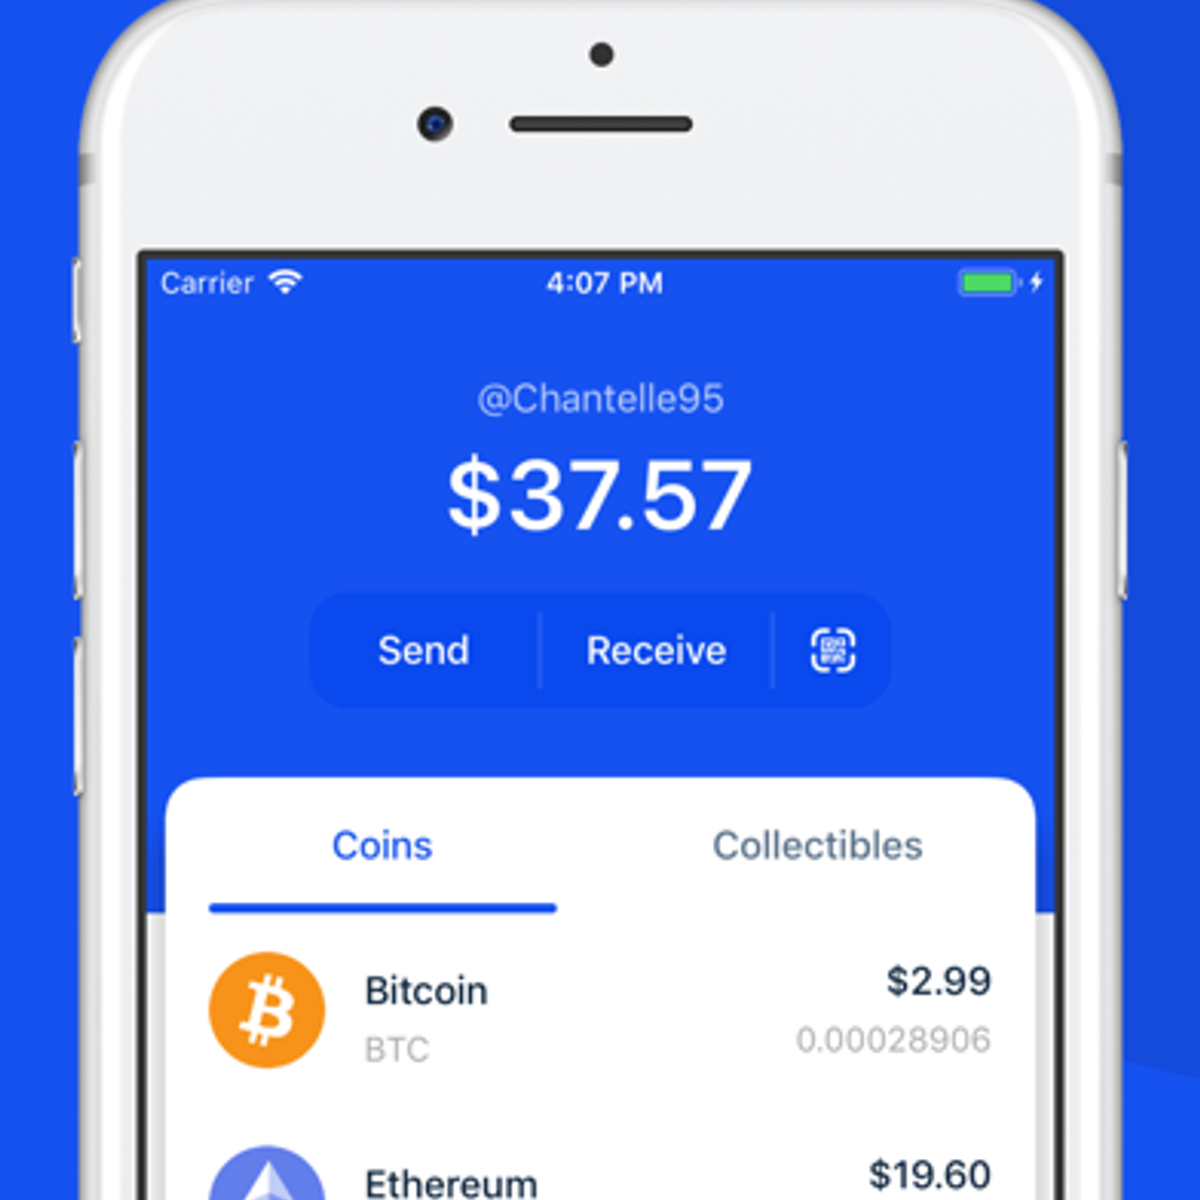 about coinbase wallet